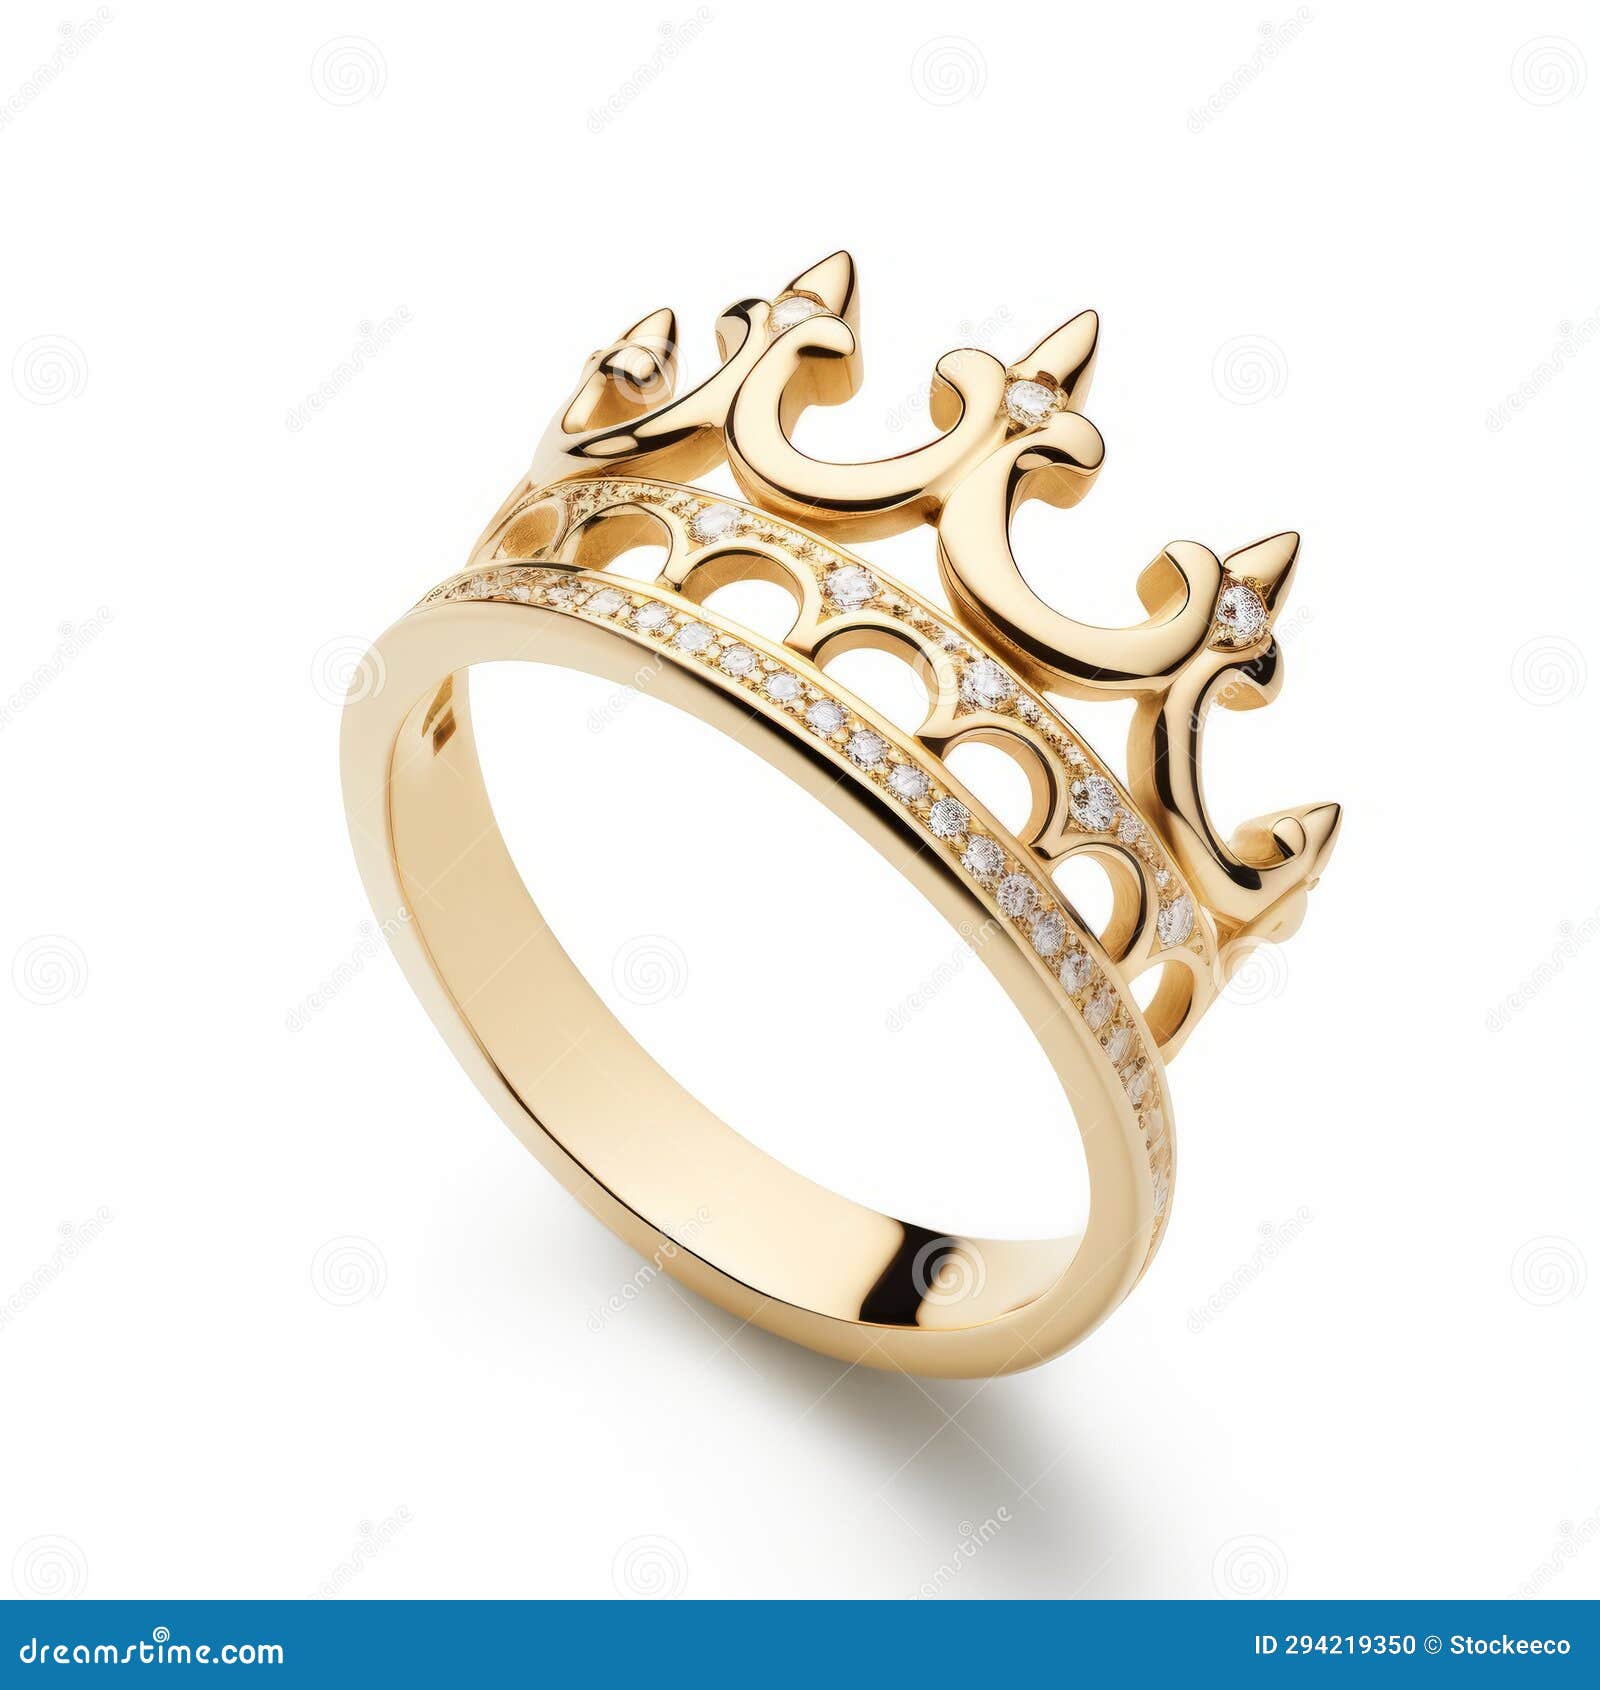 royal crown ring in gold with diamonds - alasdair mclellan style